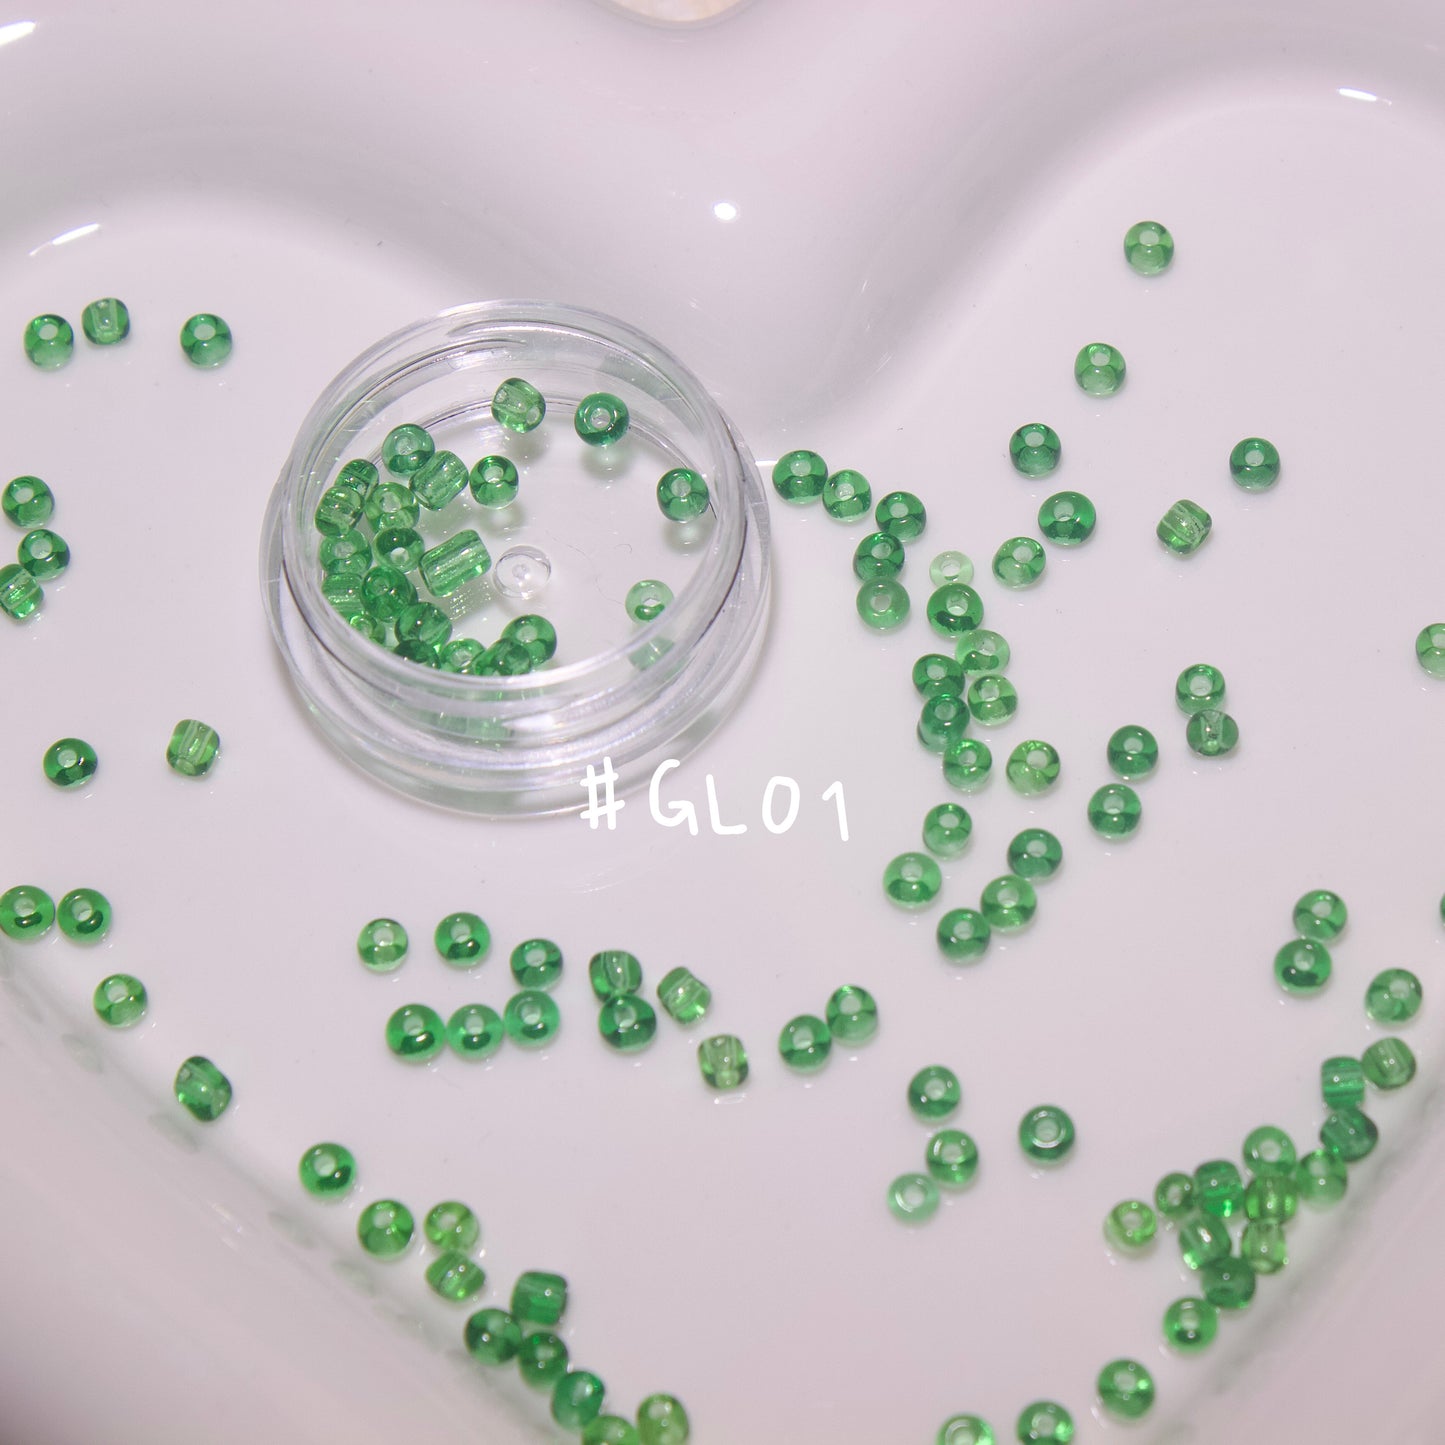 LUBRANO NAIL - Green Garden，Spring Green Series Small Colored Beads Nail Art Accessories